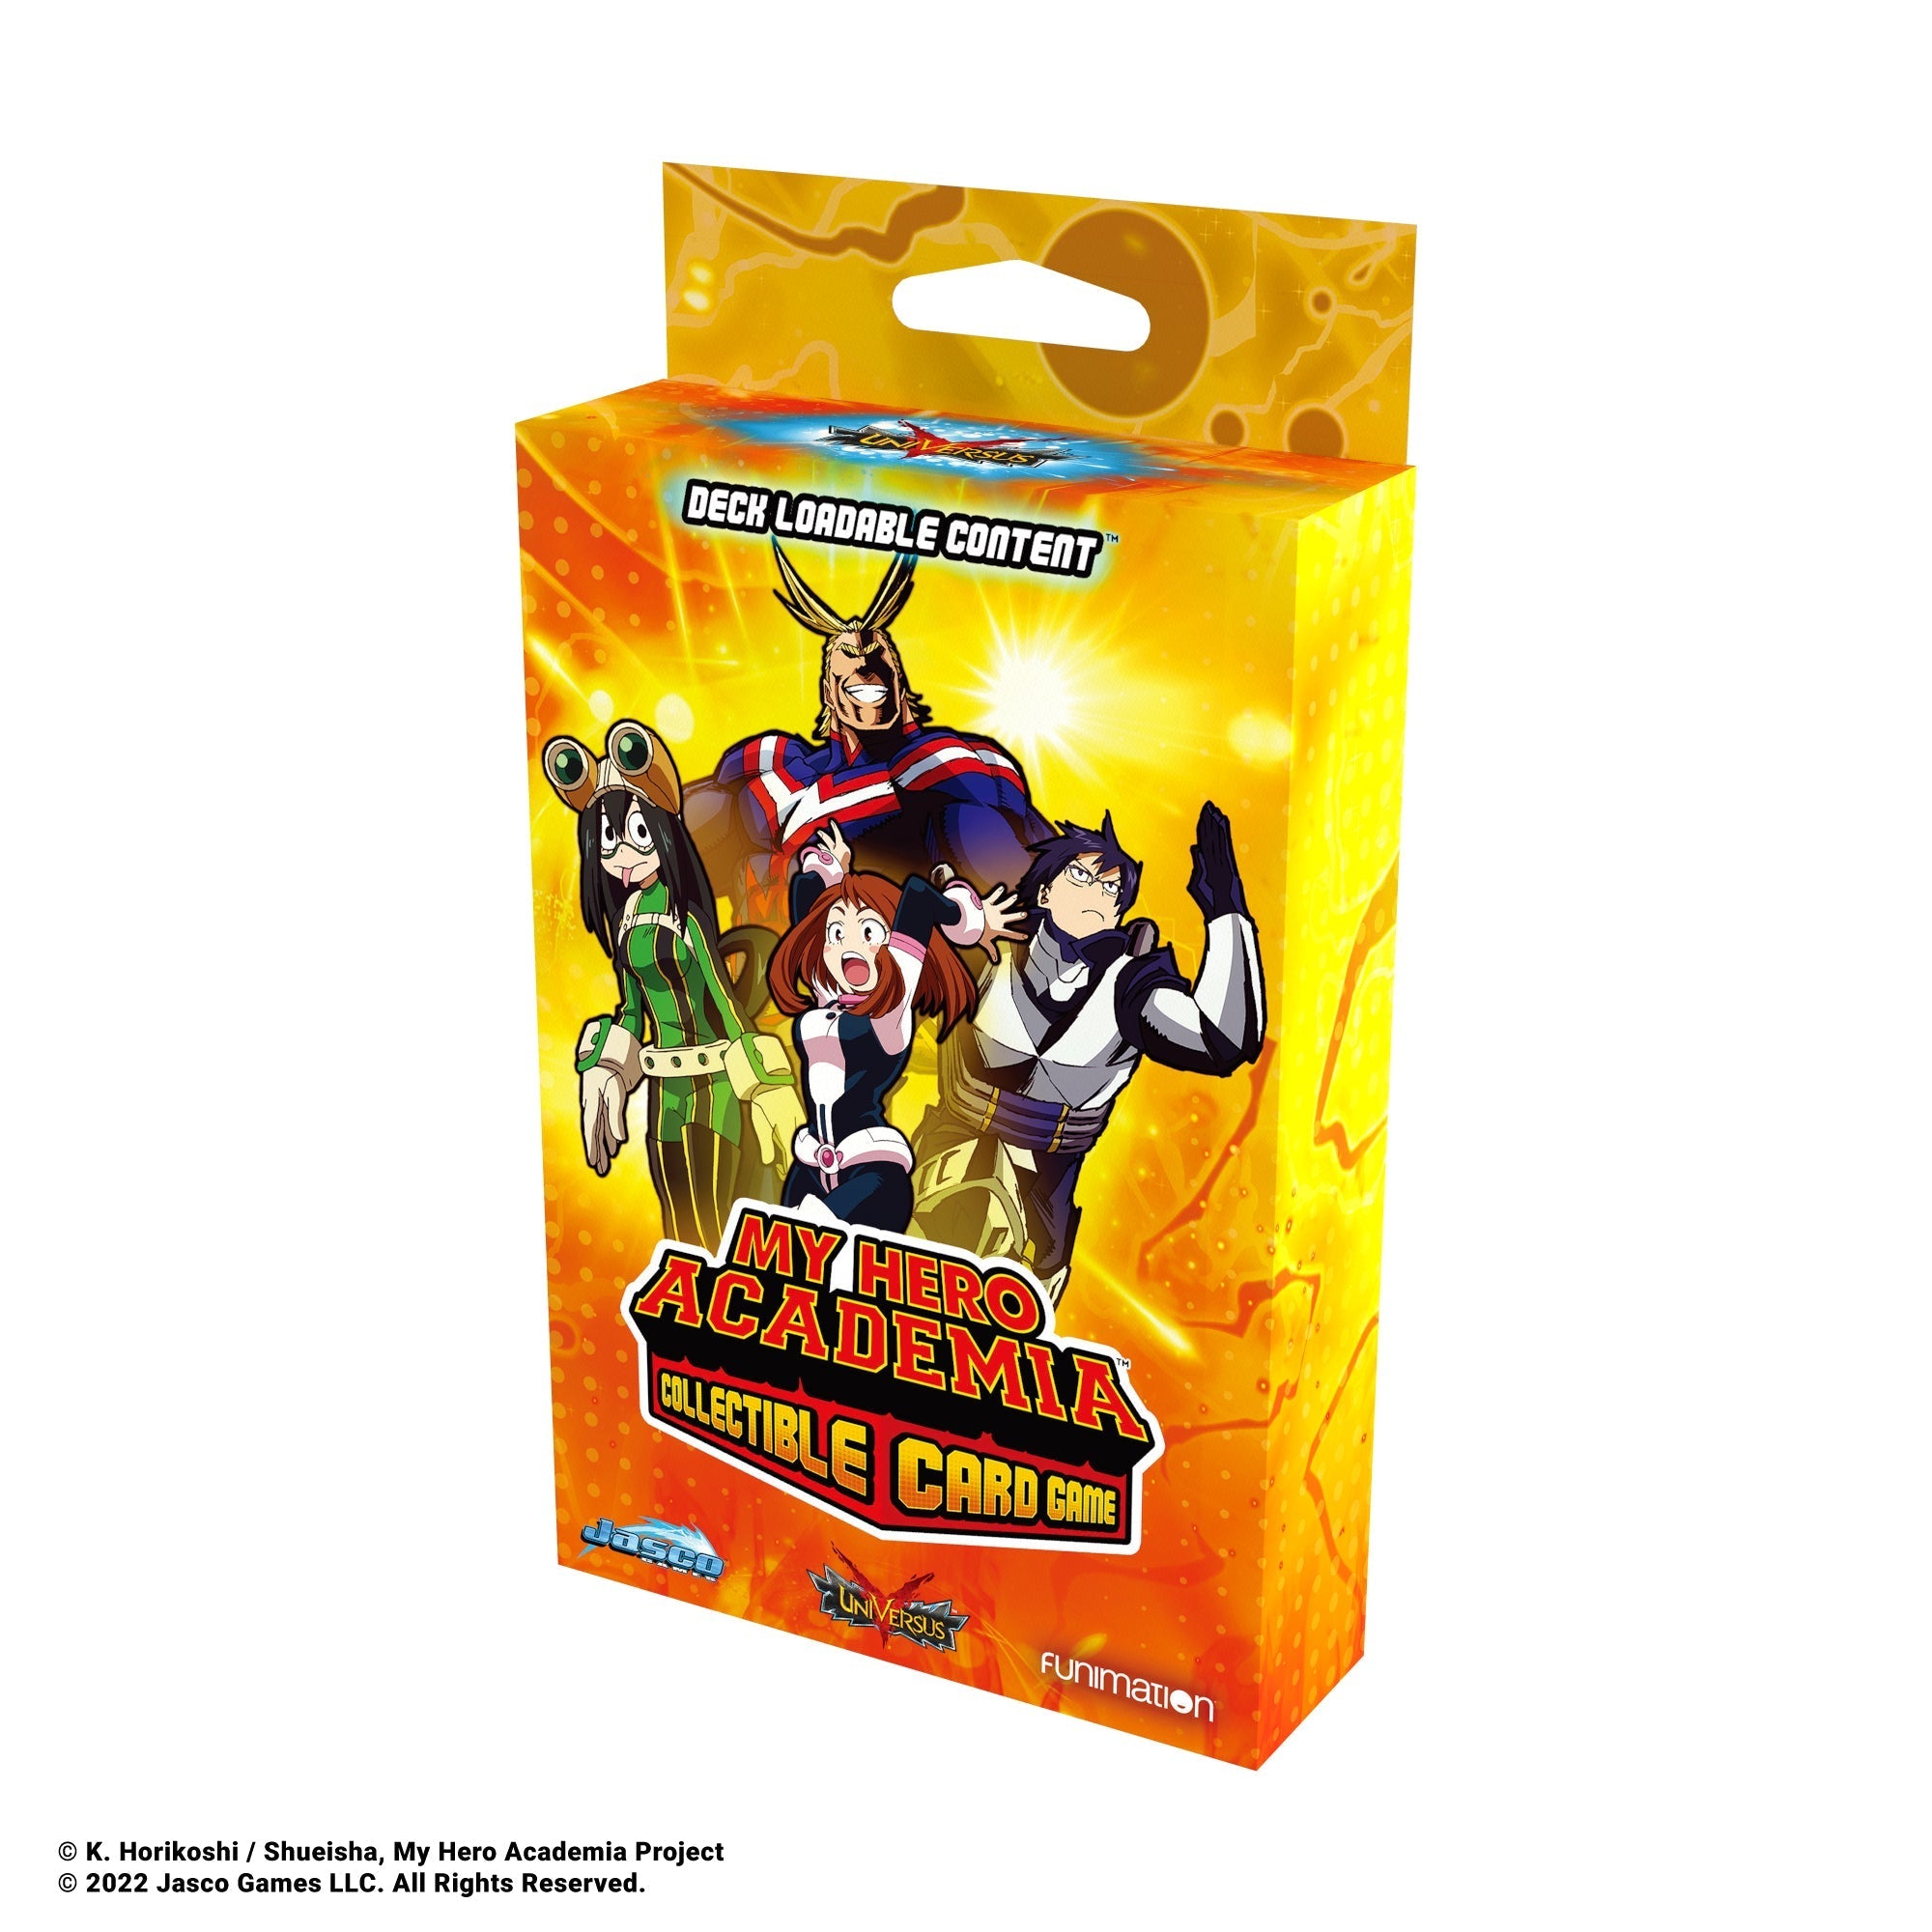 My Hero Academia - Collectible Card Game Expansion Pack image count 1